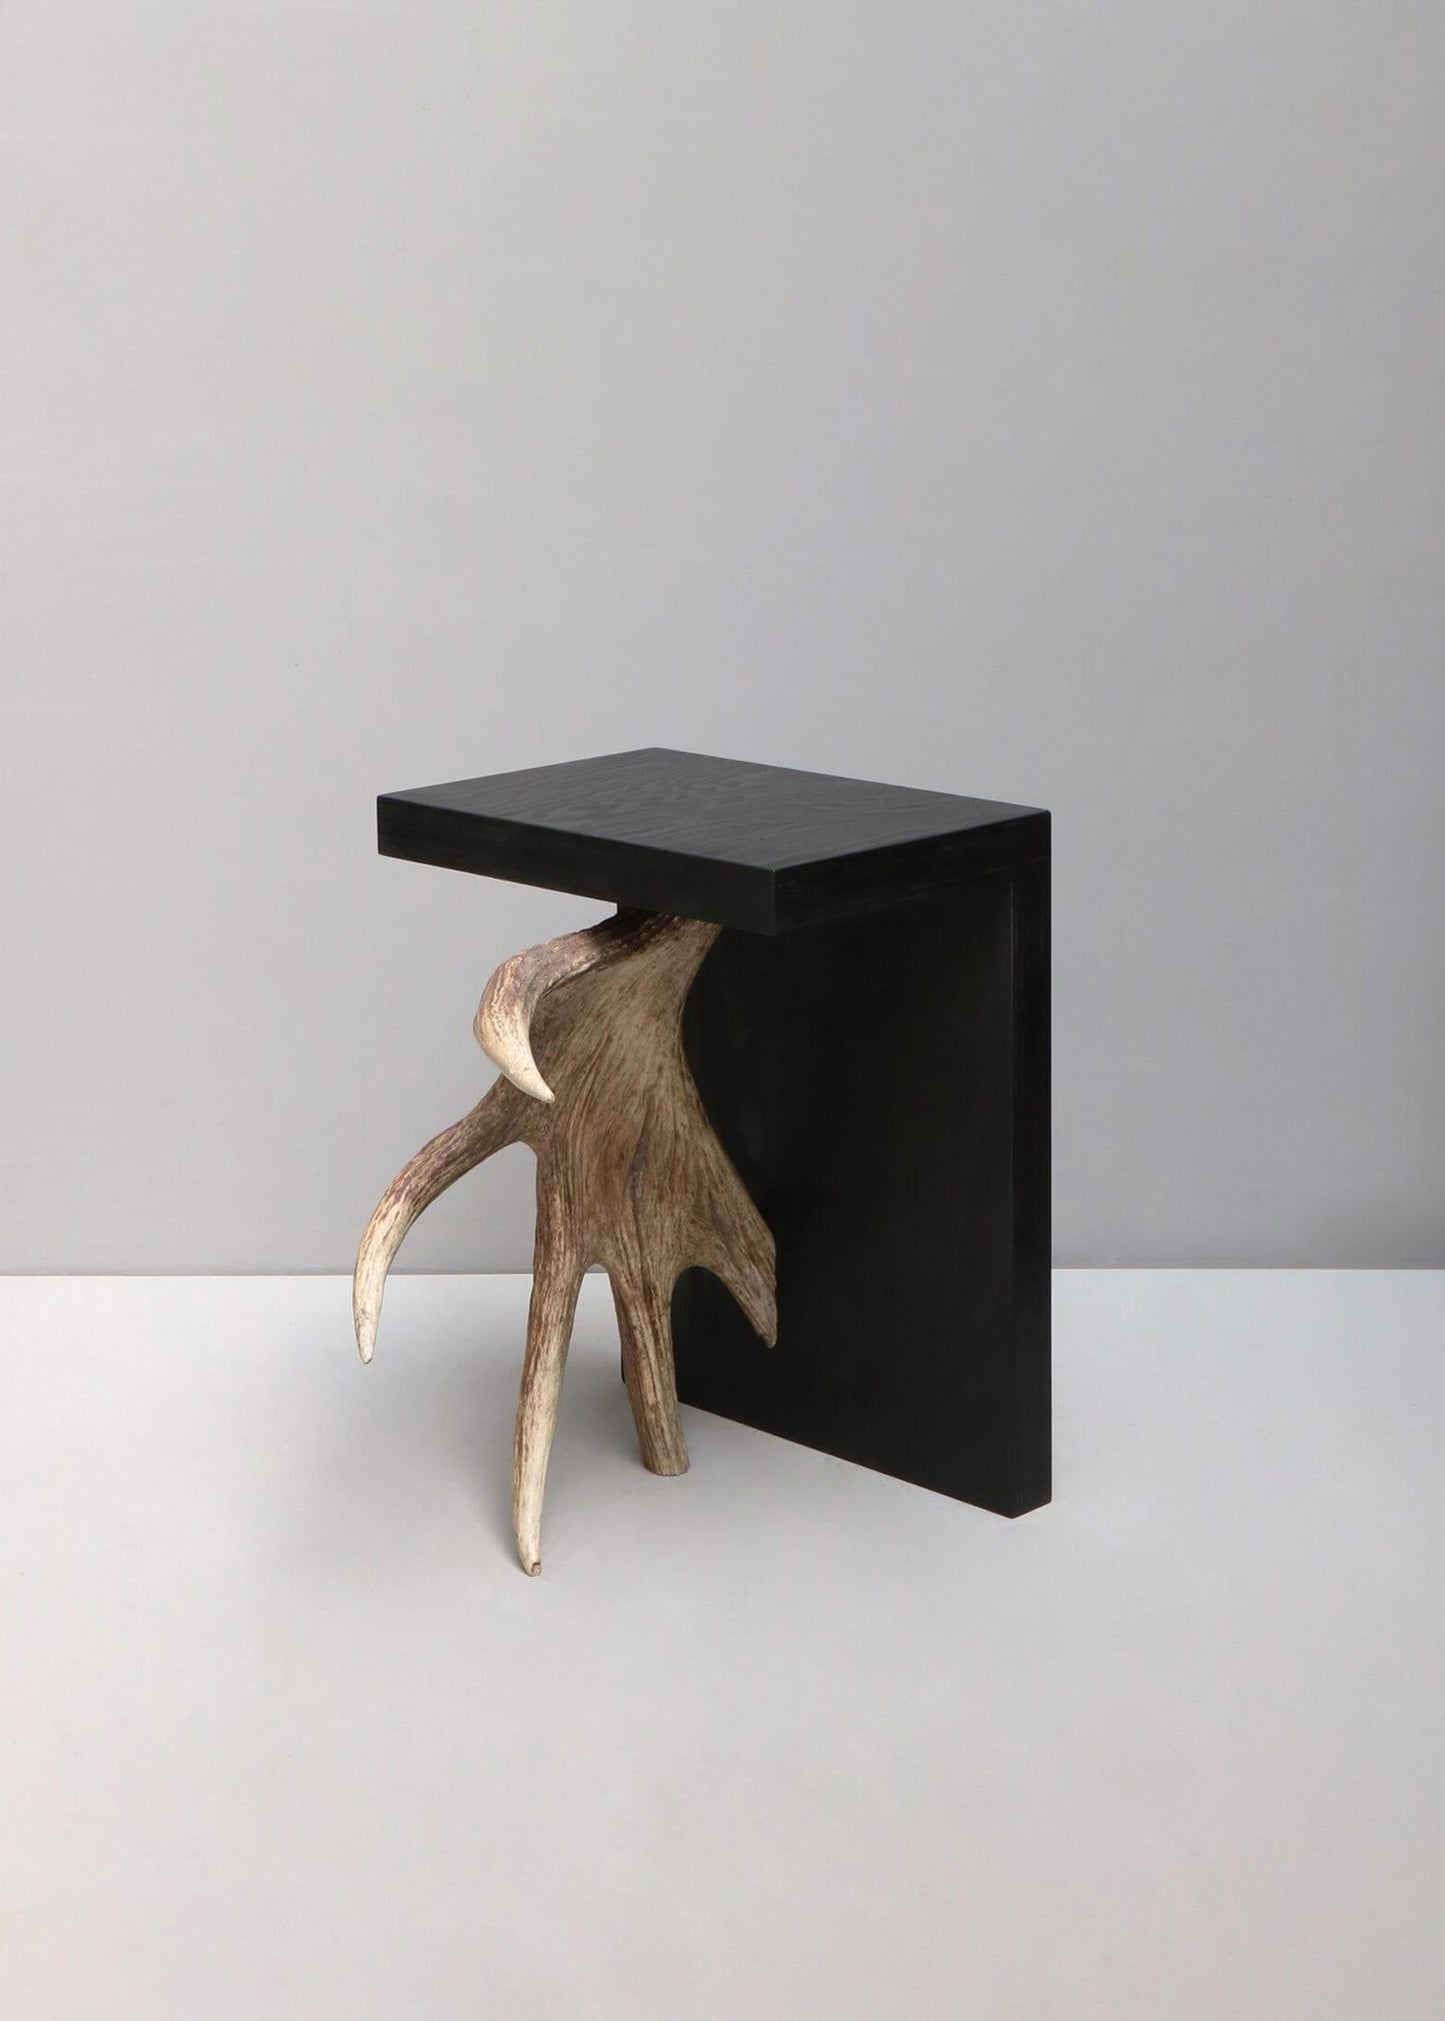 "Stag T Side Table in Black" by Rick Owens